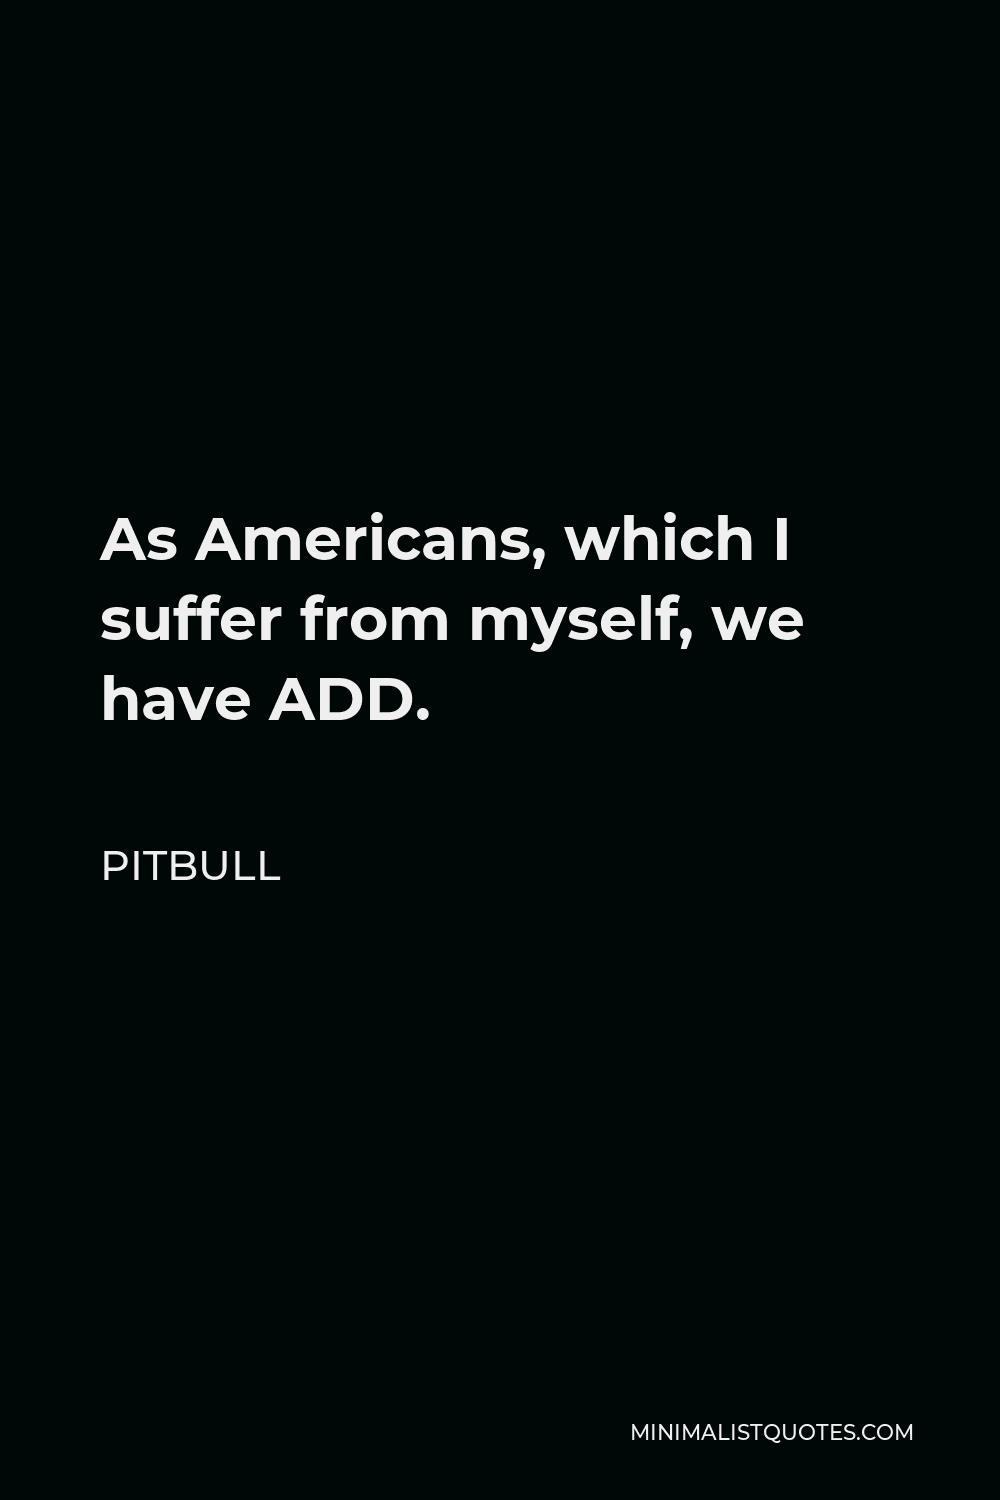 Pitbull Quote - As Americans, which I suffer from myself, we have ADD.